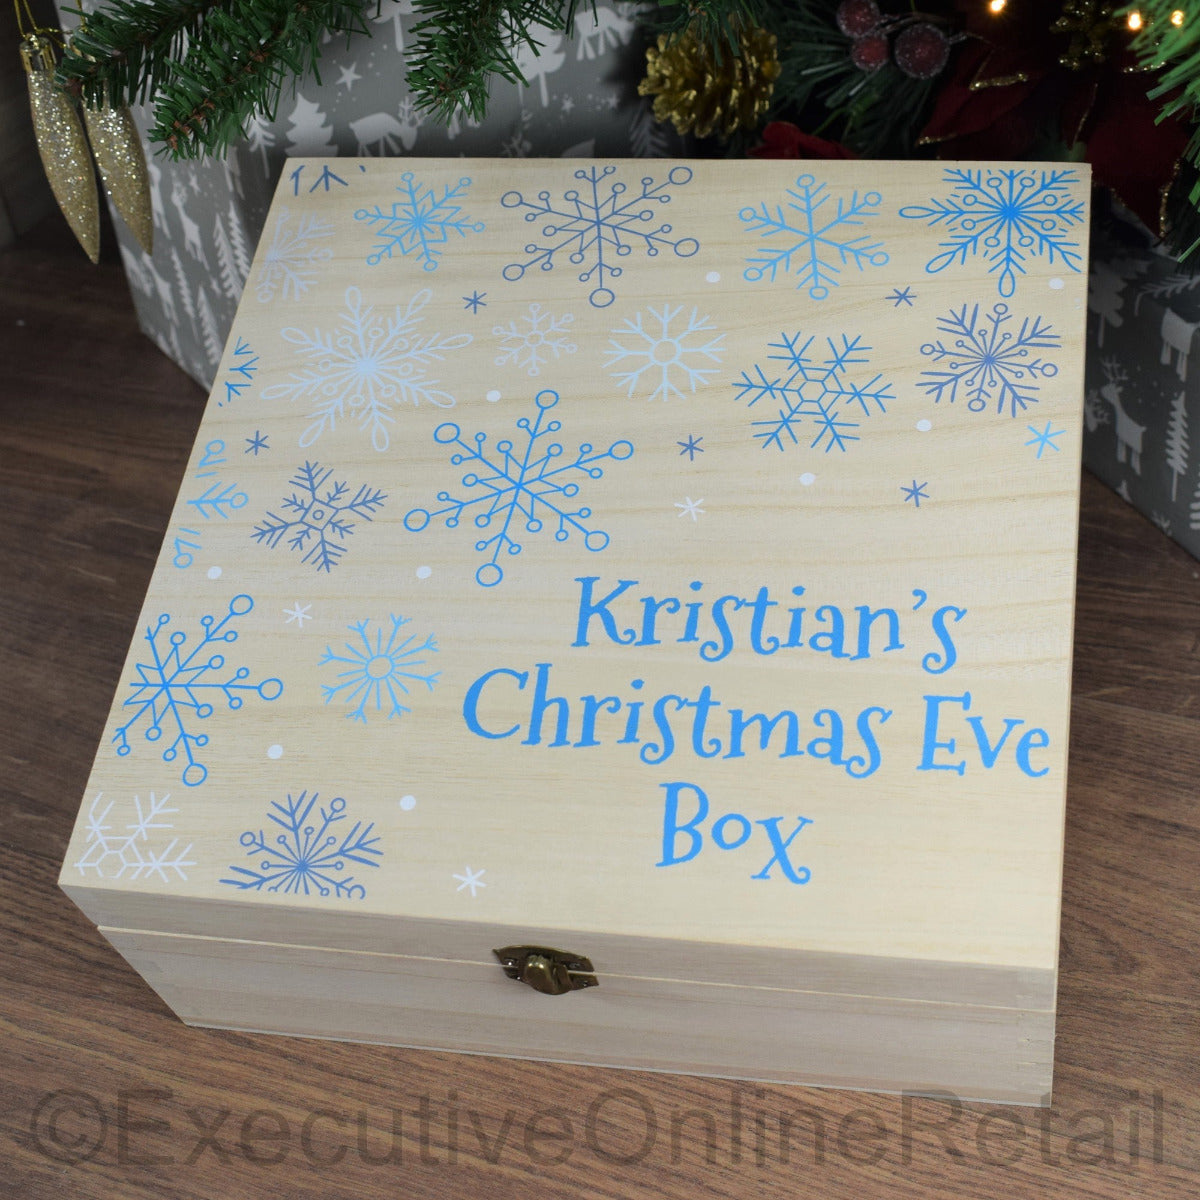 Personalised Printed Wooden Christmas Eve Box - Snowflakes